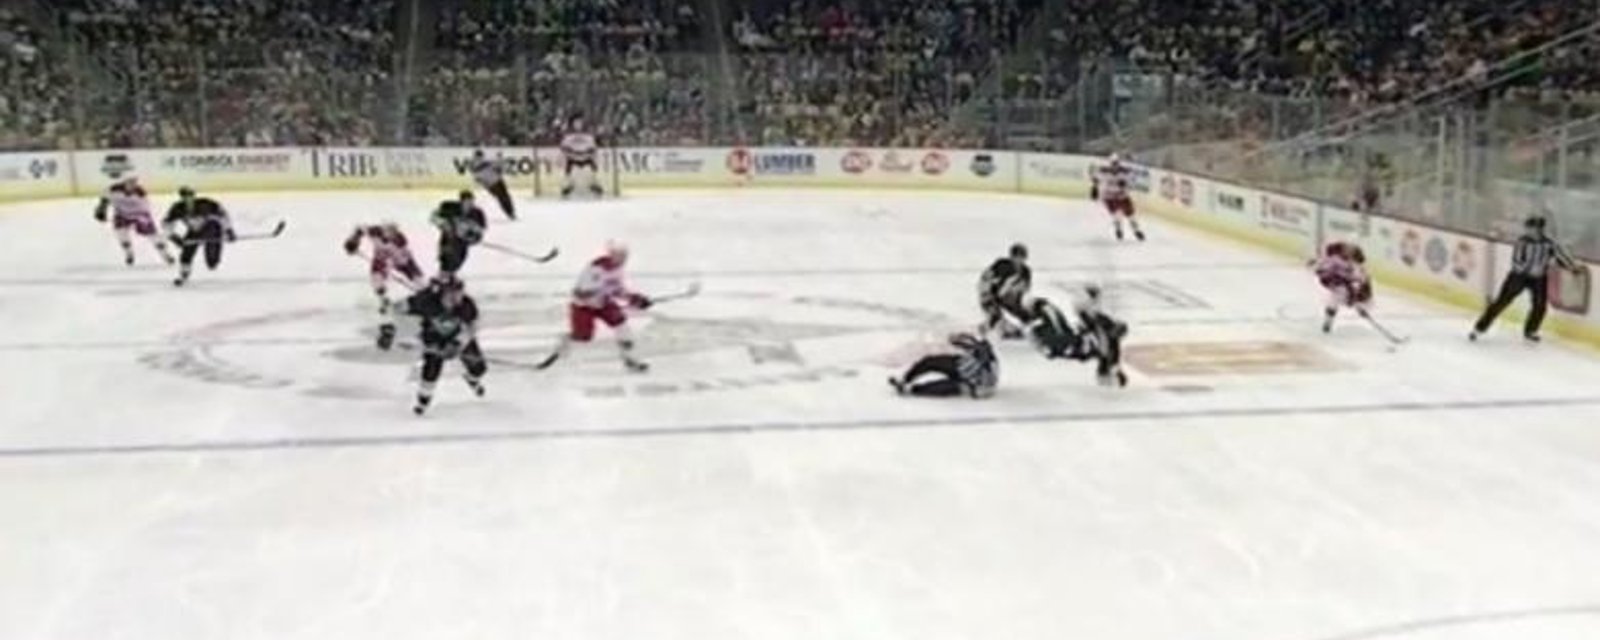 Referee injures defenseman with a brutal hit.